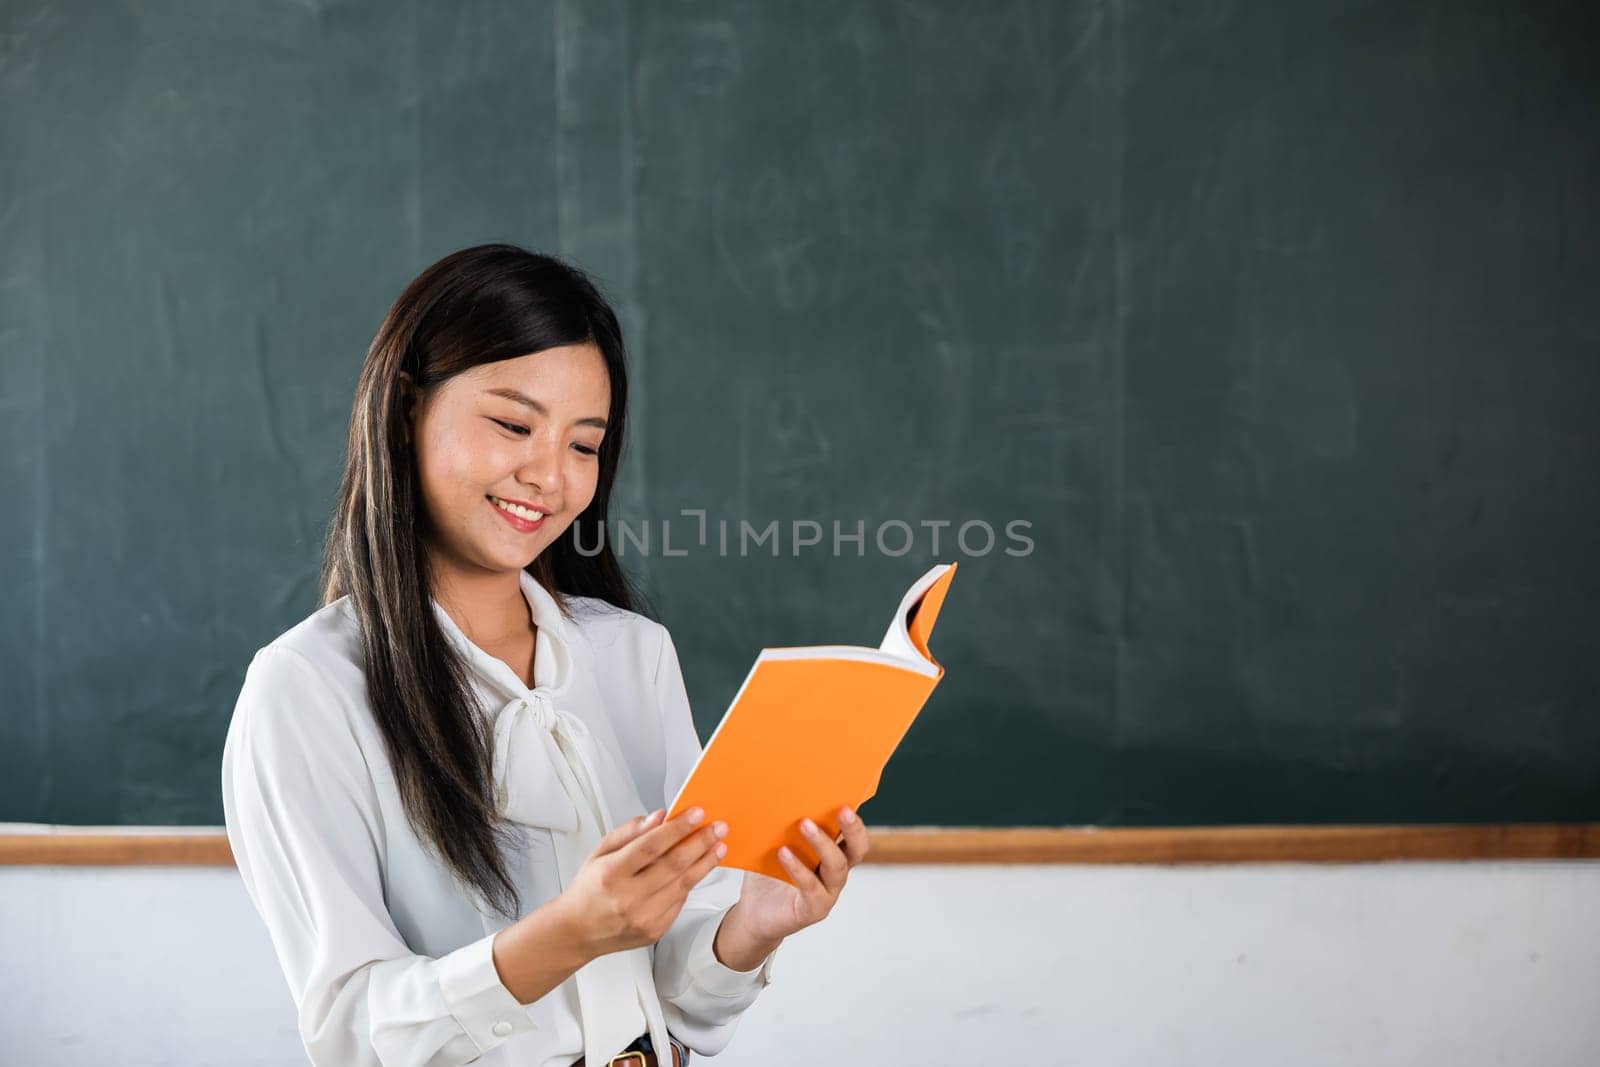 A woman is reading a book in a classroom. She is smiling and she is enjoying the book